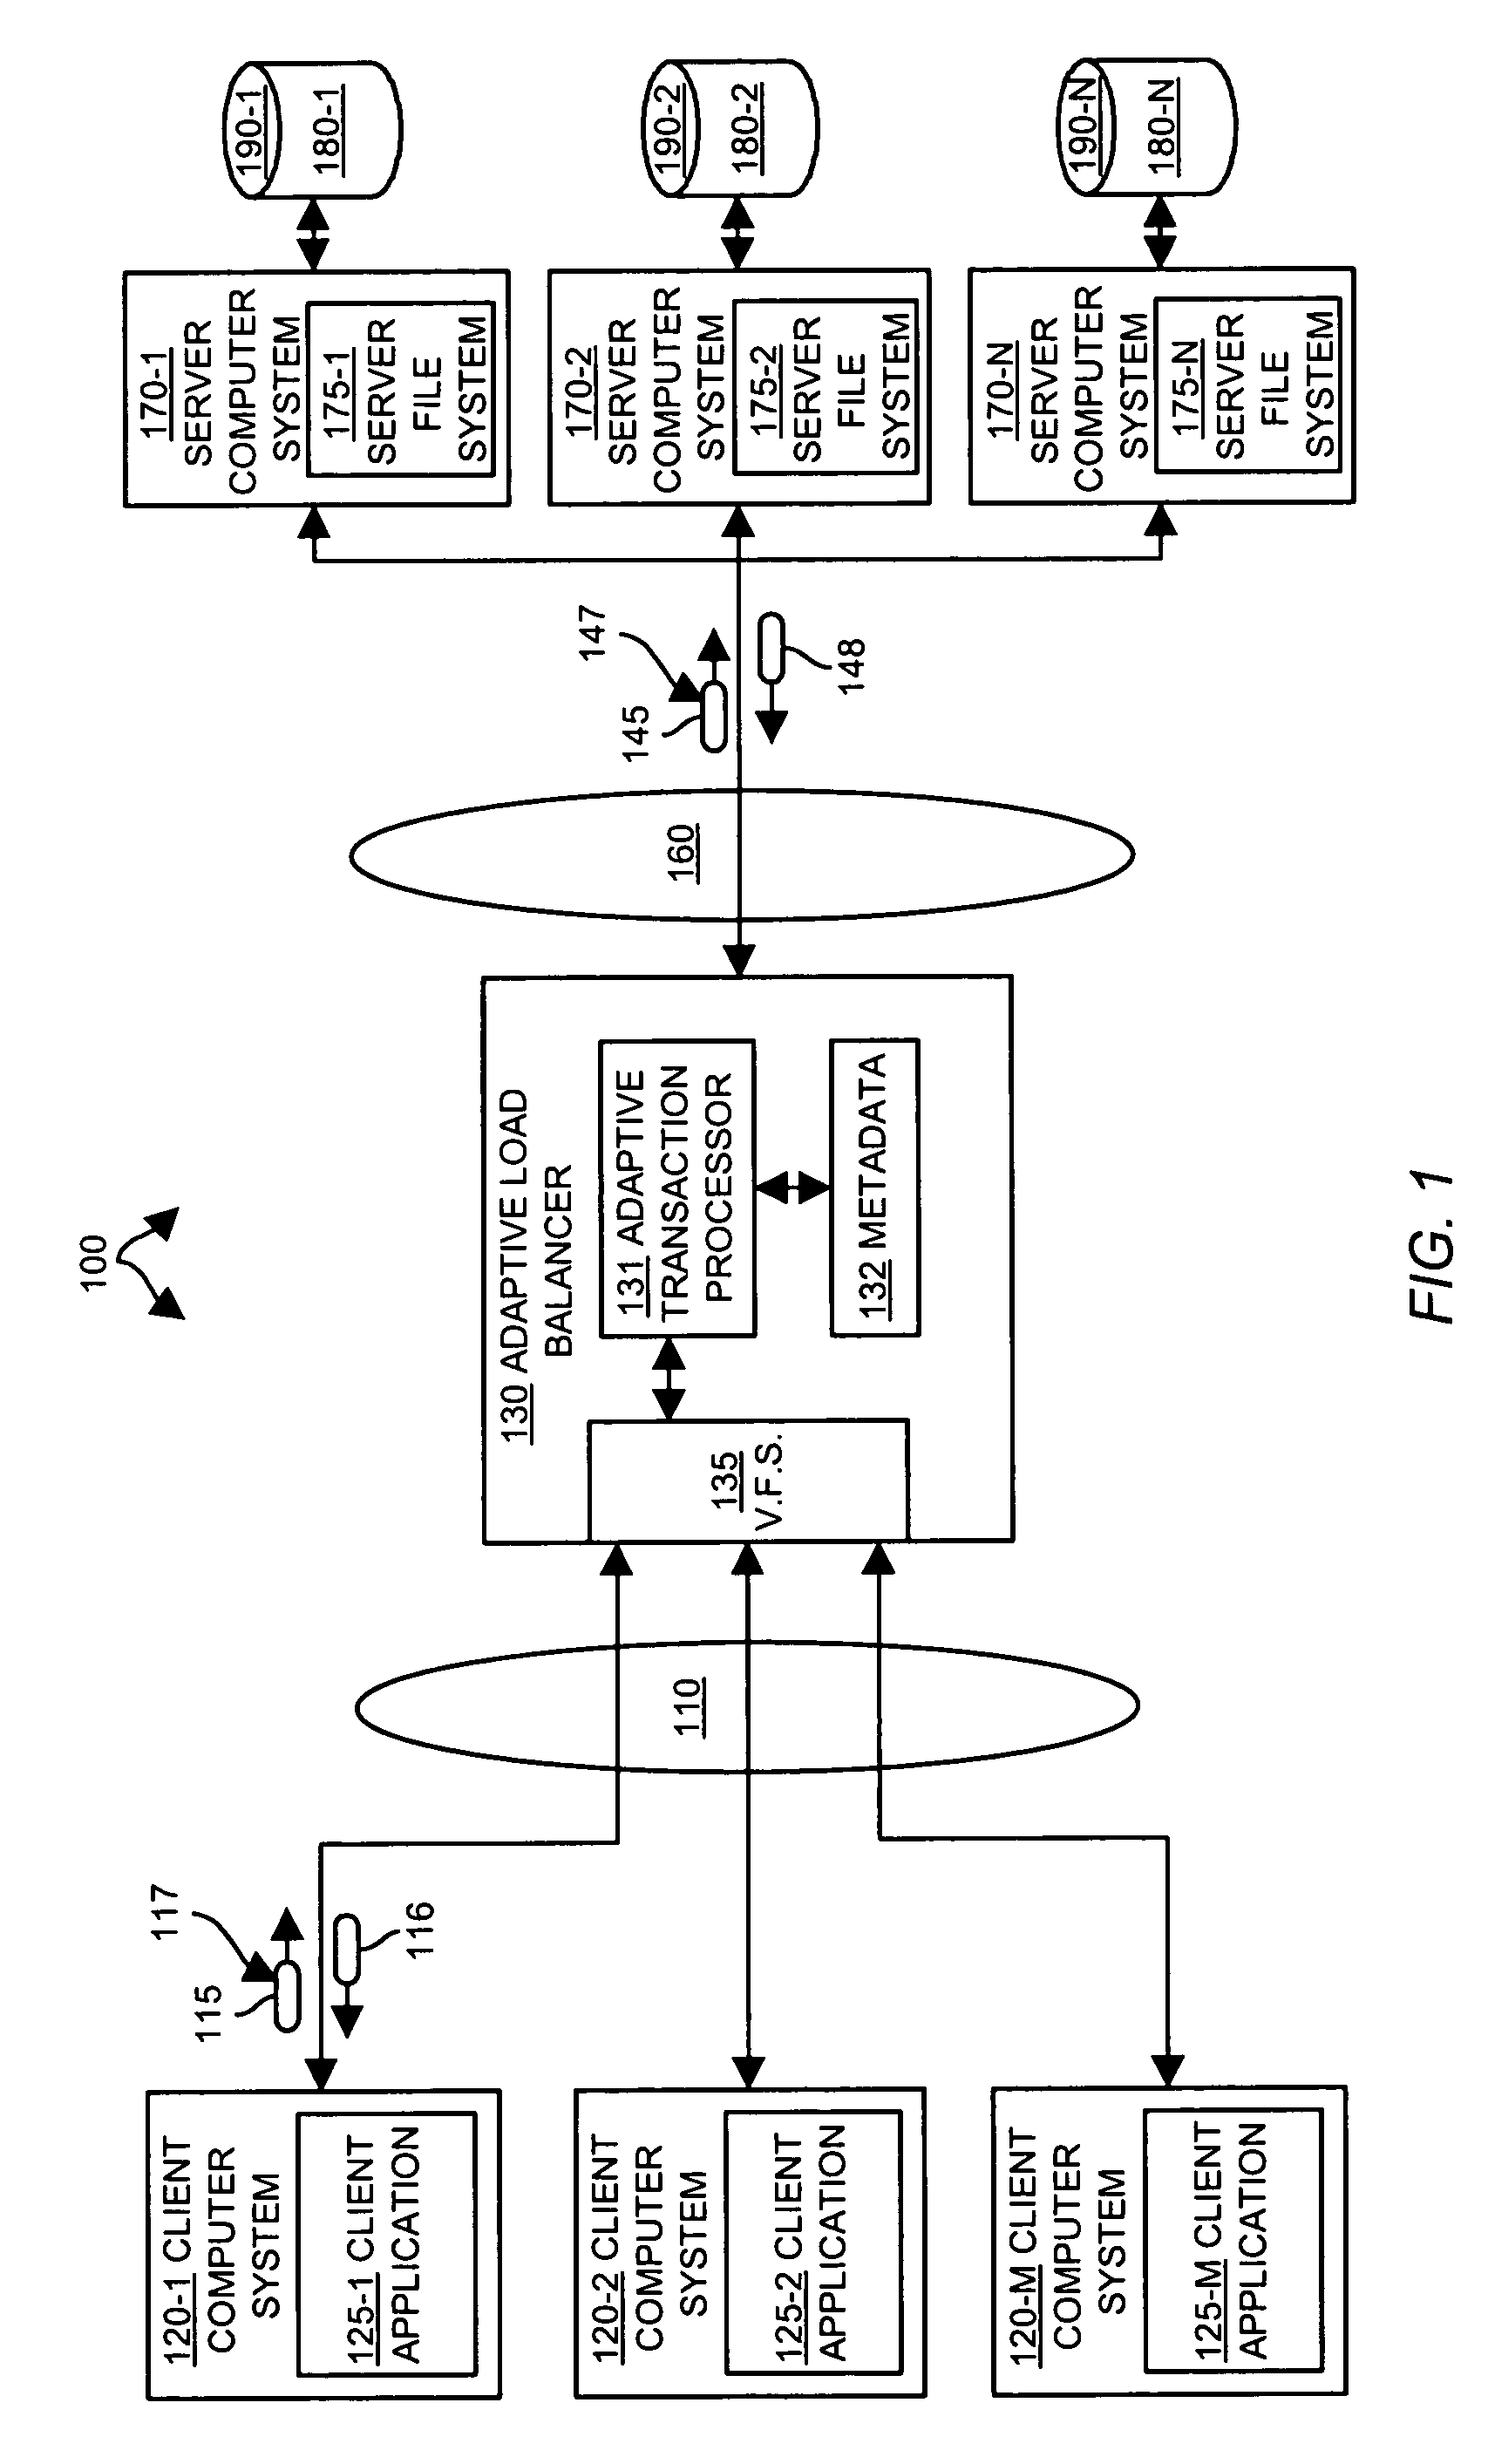 Method and apparatus for adaptive services networking